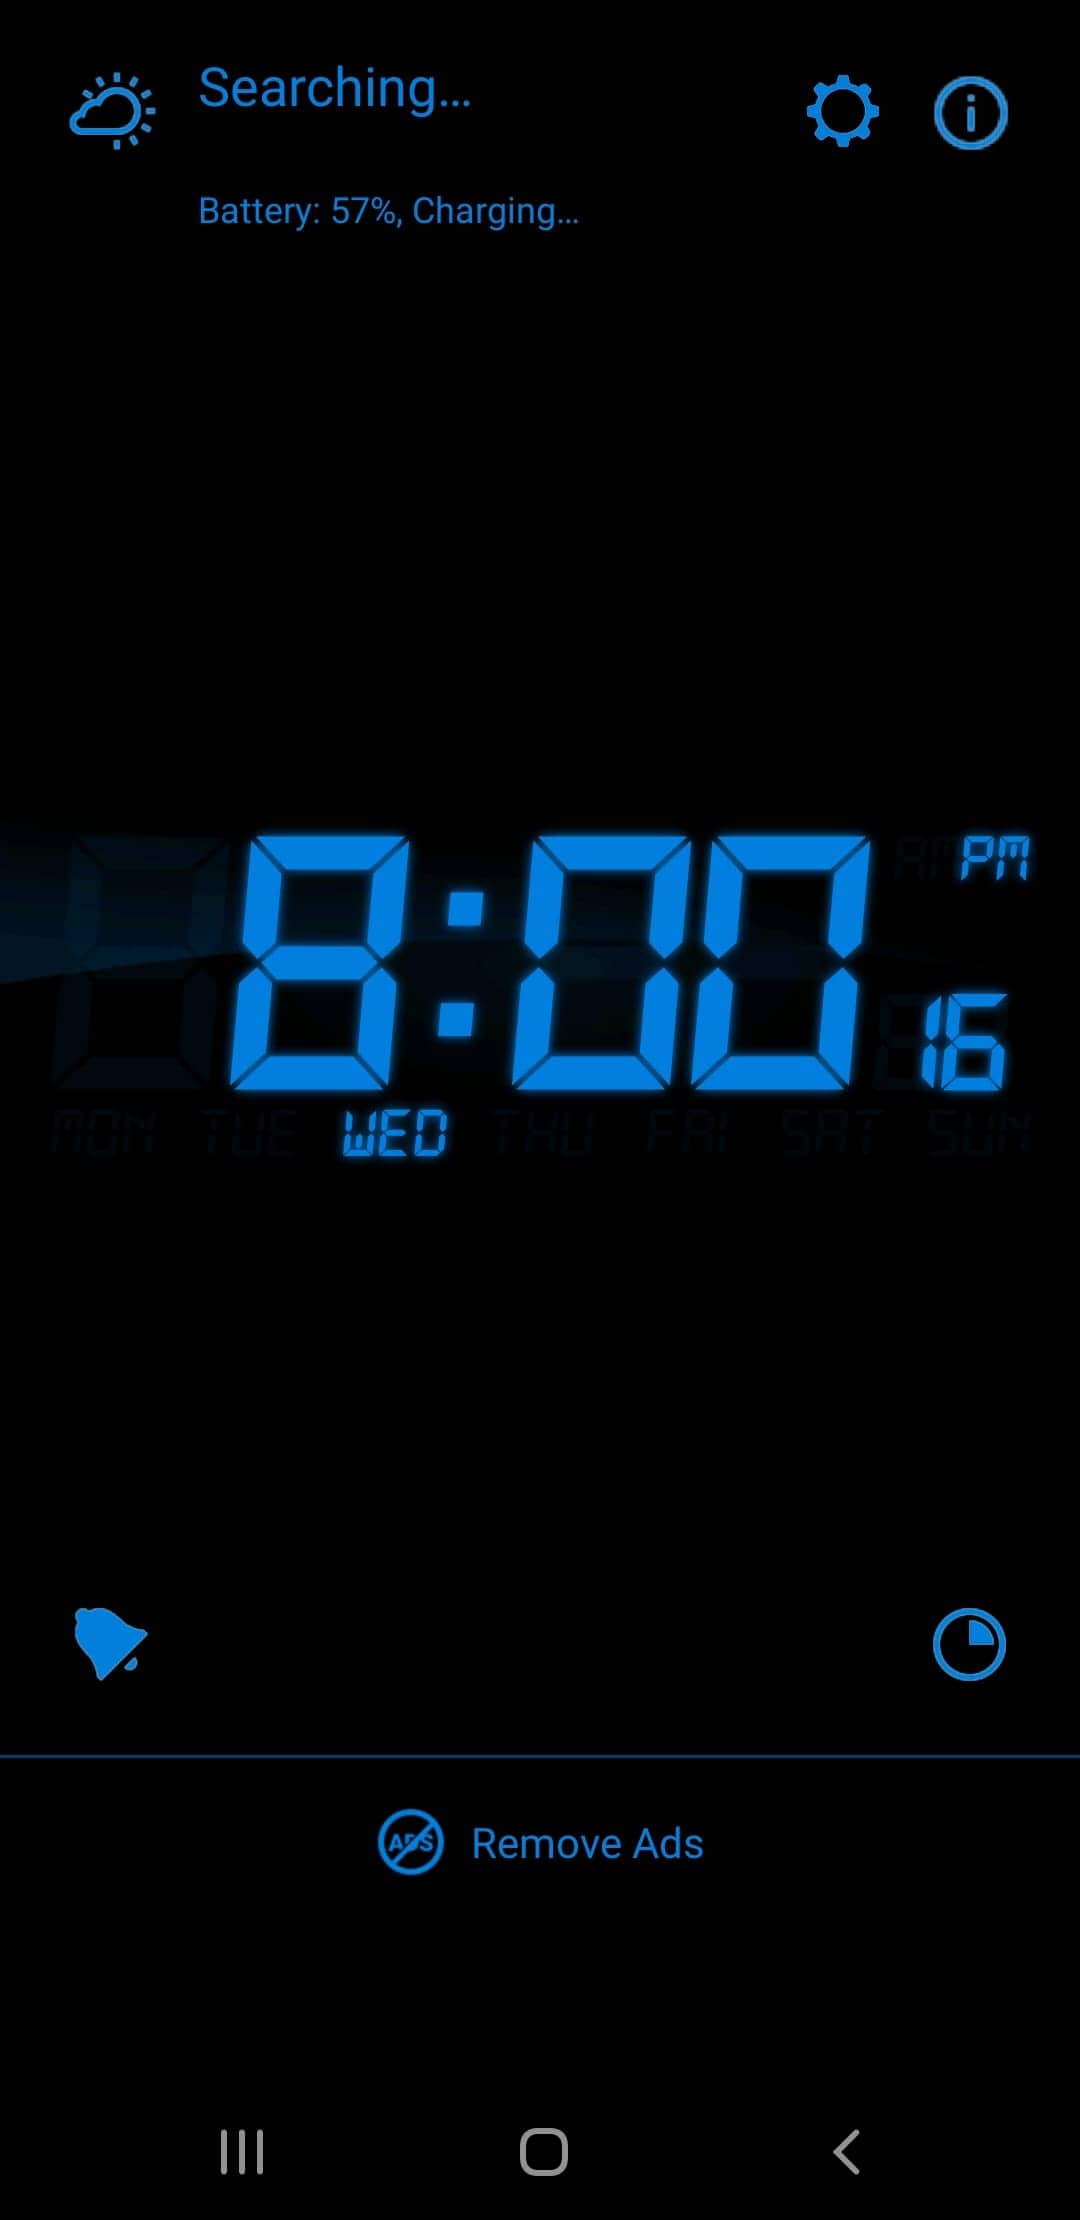 Screenshot From Our Alarm Clock for Me Review